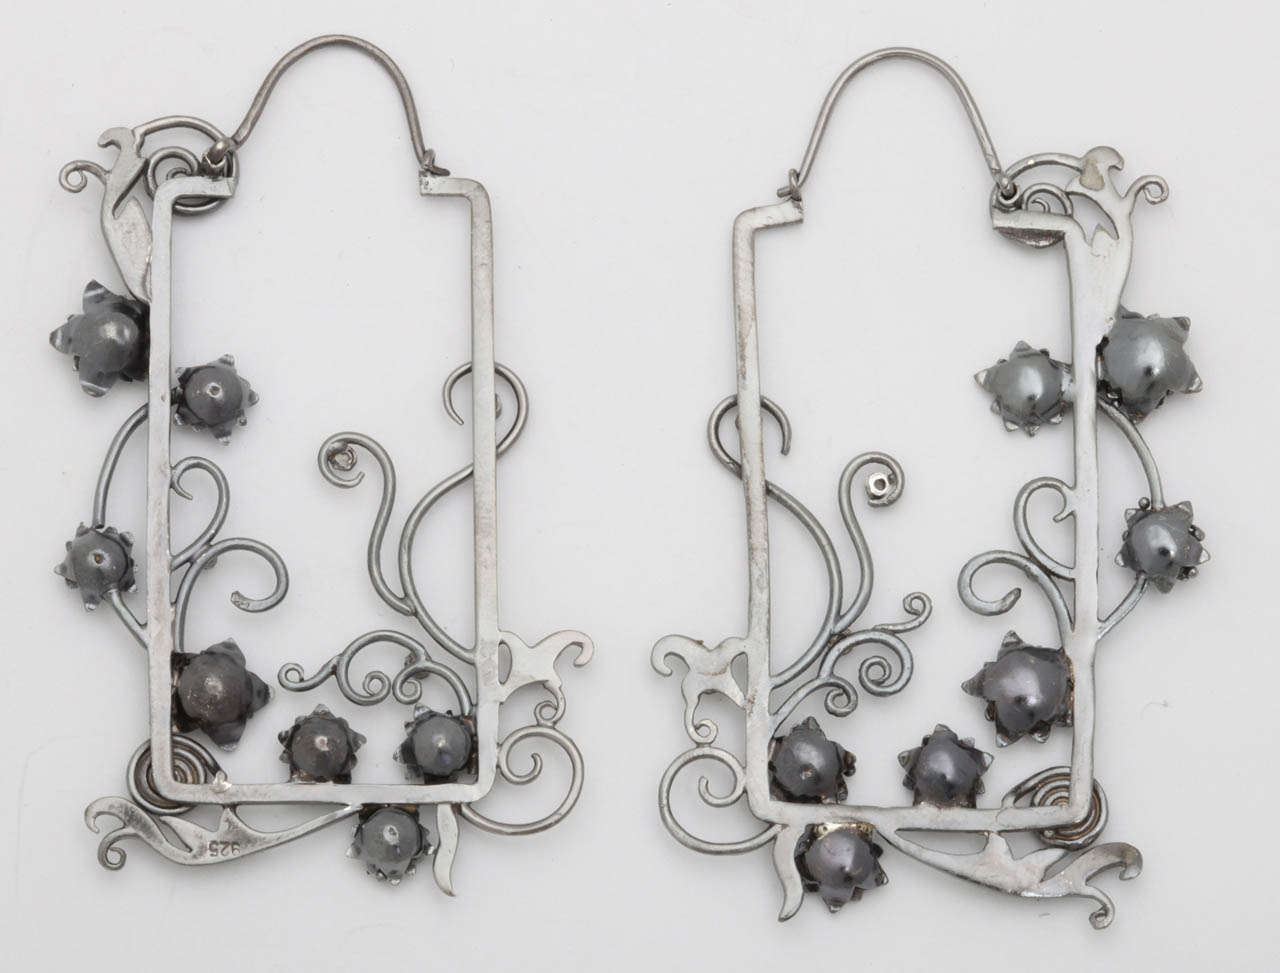 A pair of sterling silver and diamond window pane earrings. The panes are decorated with creeping sterling vines and flowers. There are bezel set diamonds in the center of each flower.